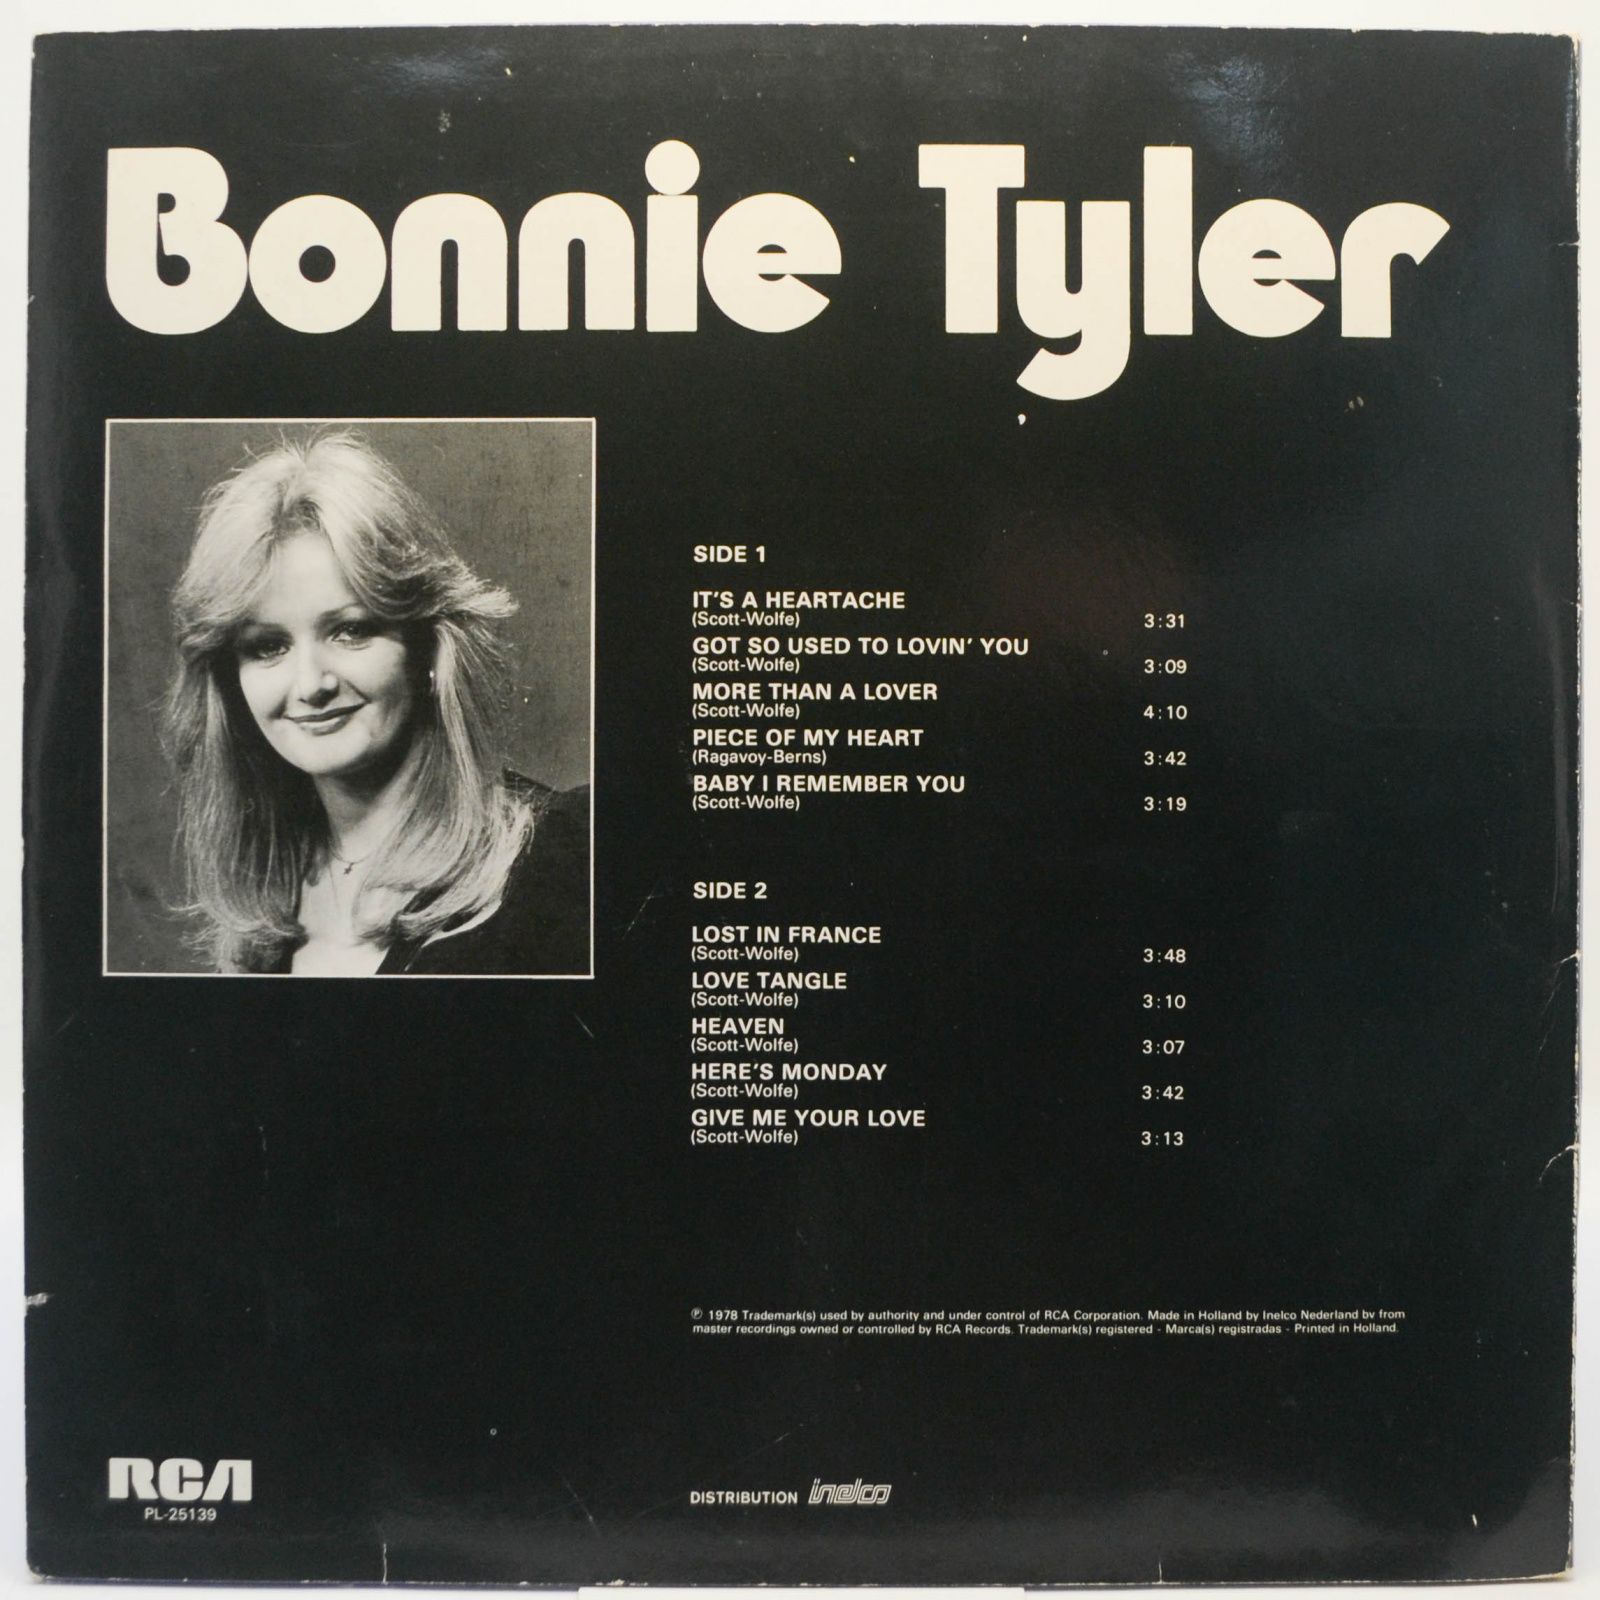 Bonnie Tyler — The Hits Of Bonnie Tyler, 1978